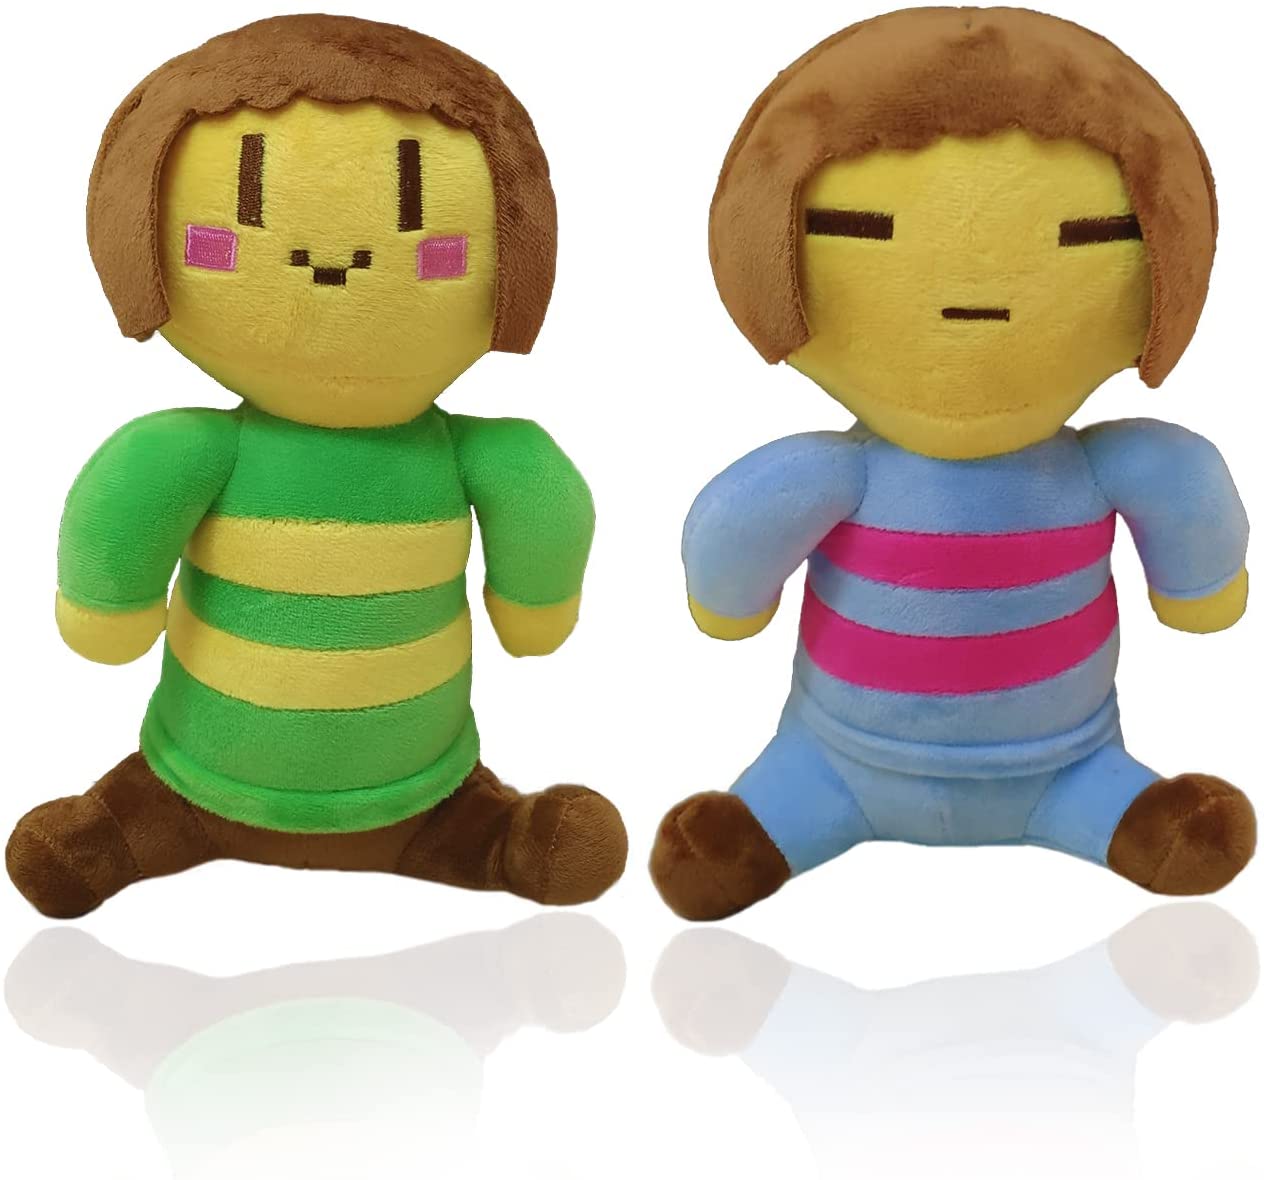 Undertale Fashion Dolls Party Favors Pack Stuffed Characters Game Toy Gift Set 